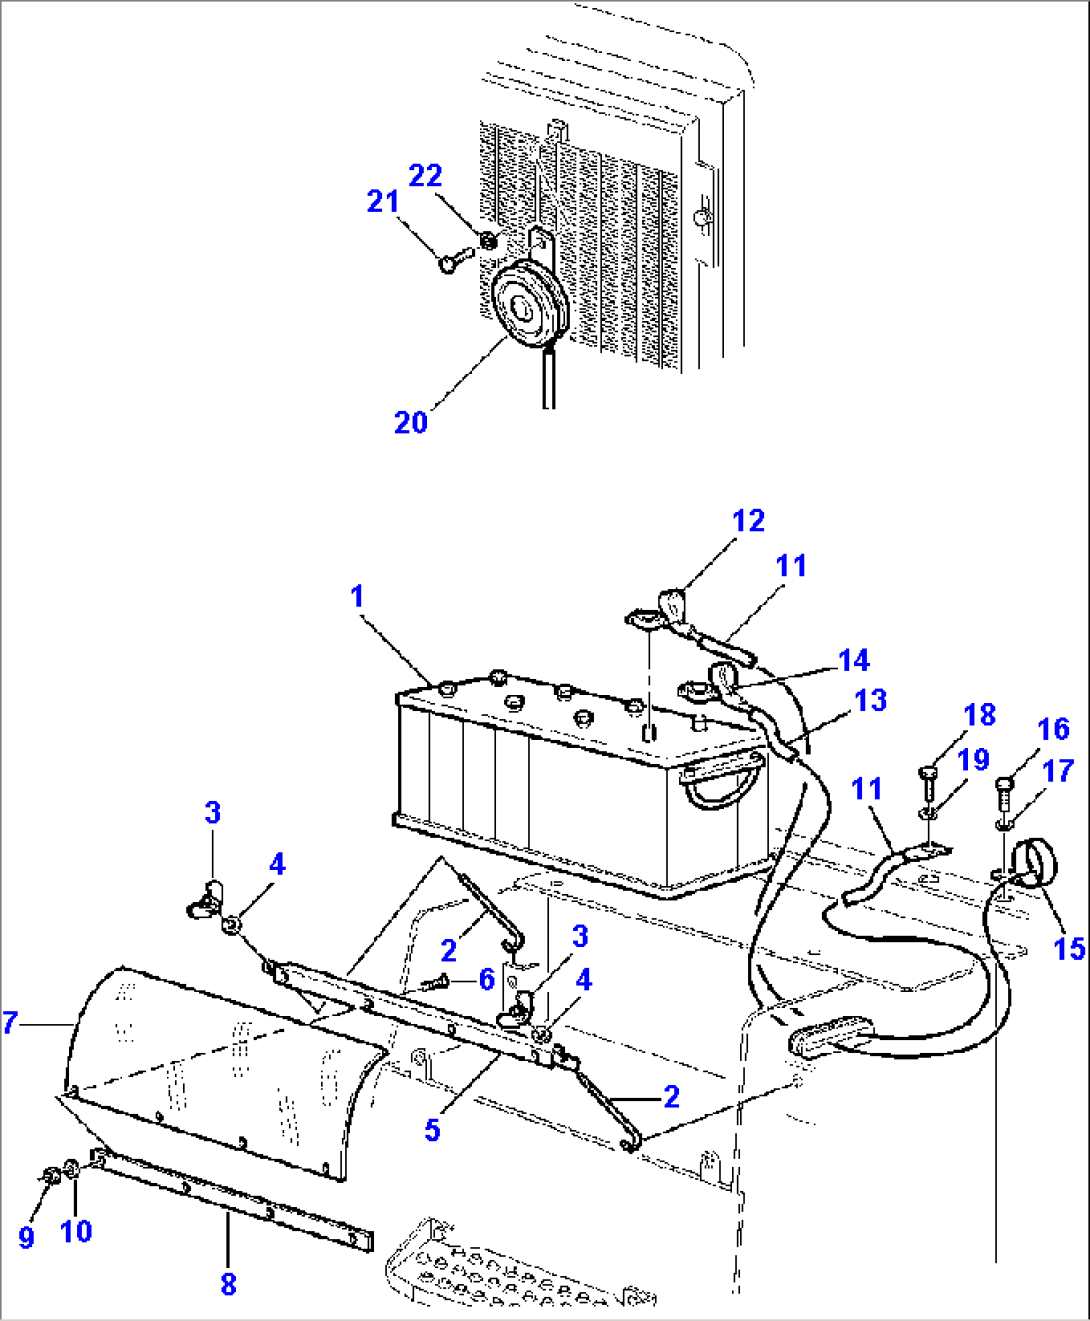 FIG. E1520-01A0 ELECTRICAL SYSTEM - BATTERY AND FRONT HORN